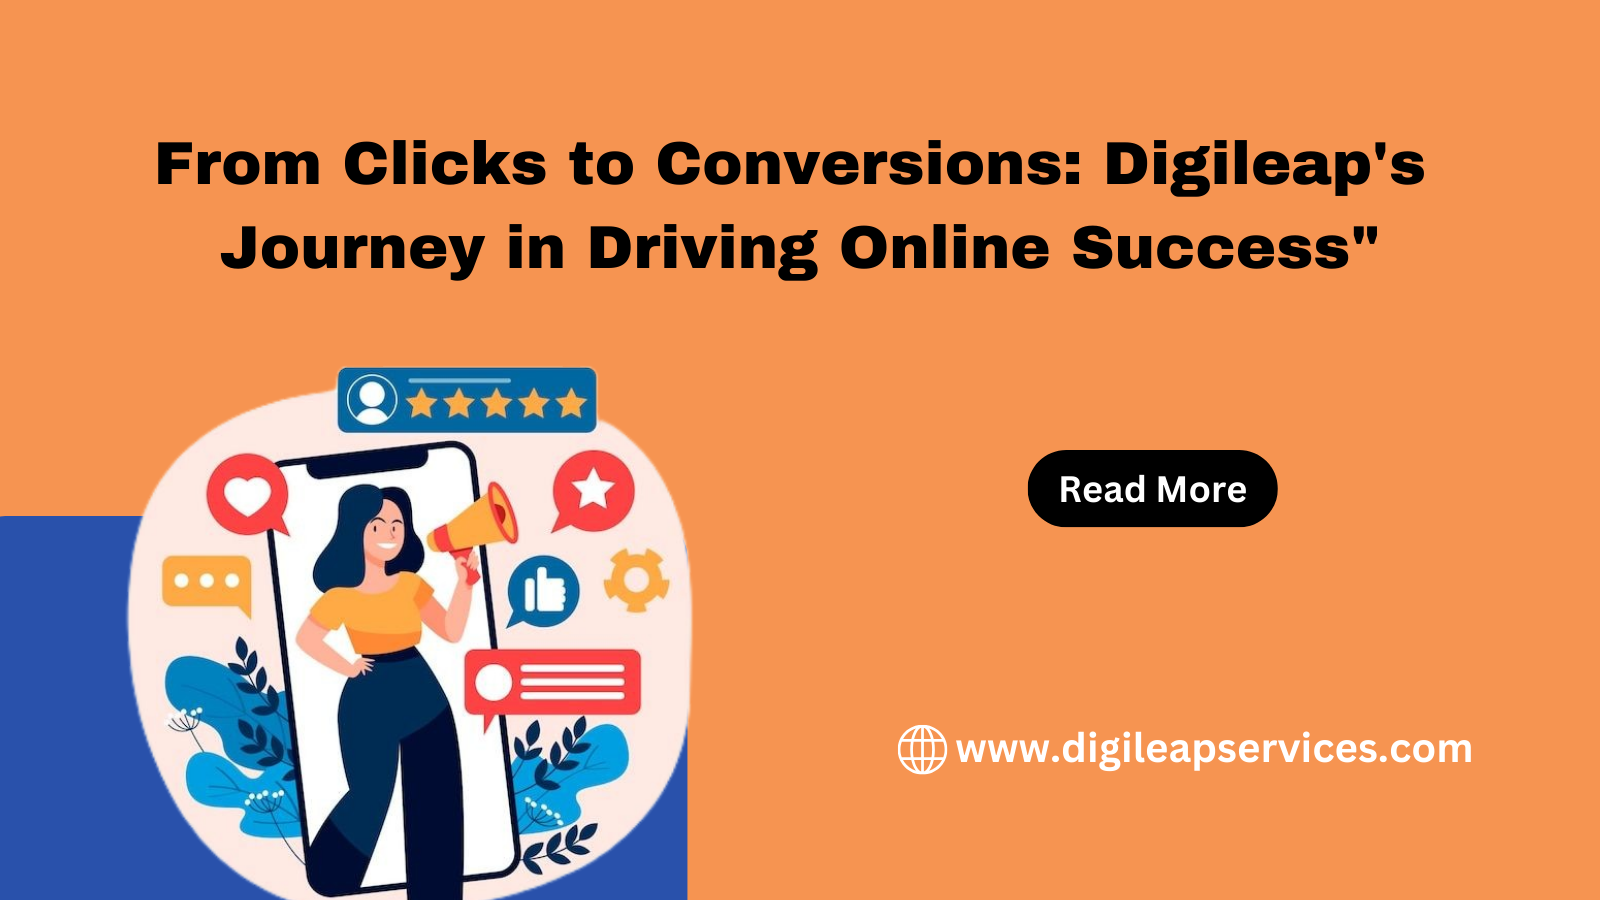 From Clicks to Conversions Digileap's Journey in Driving Online Success